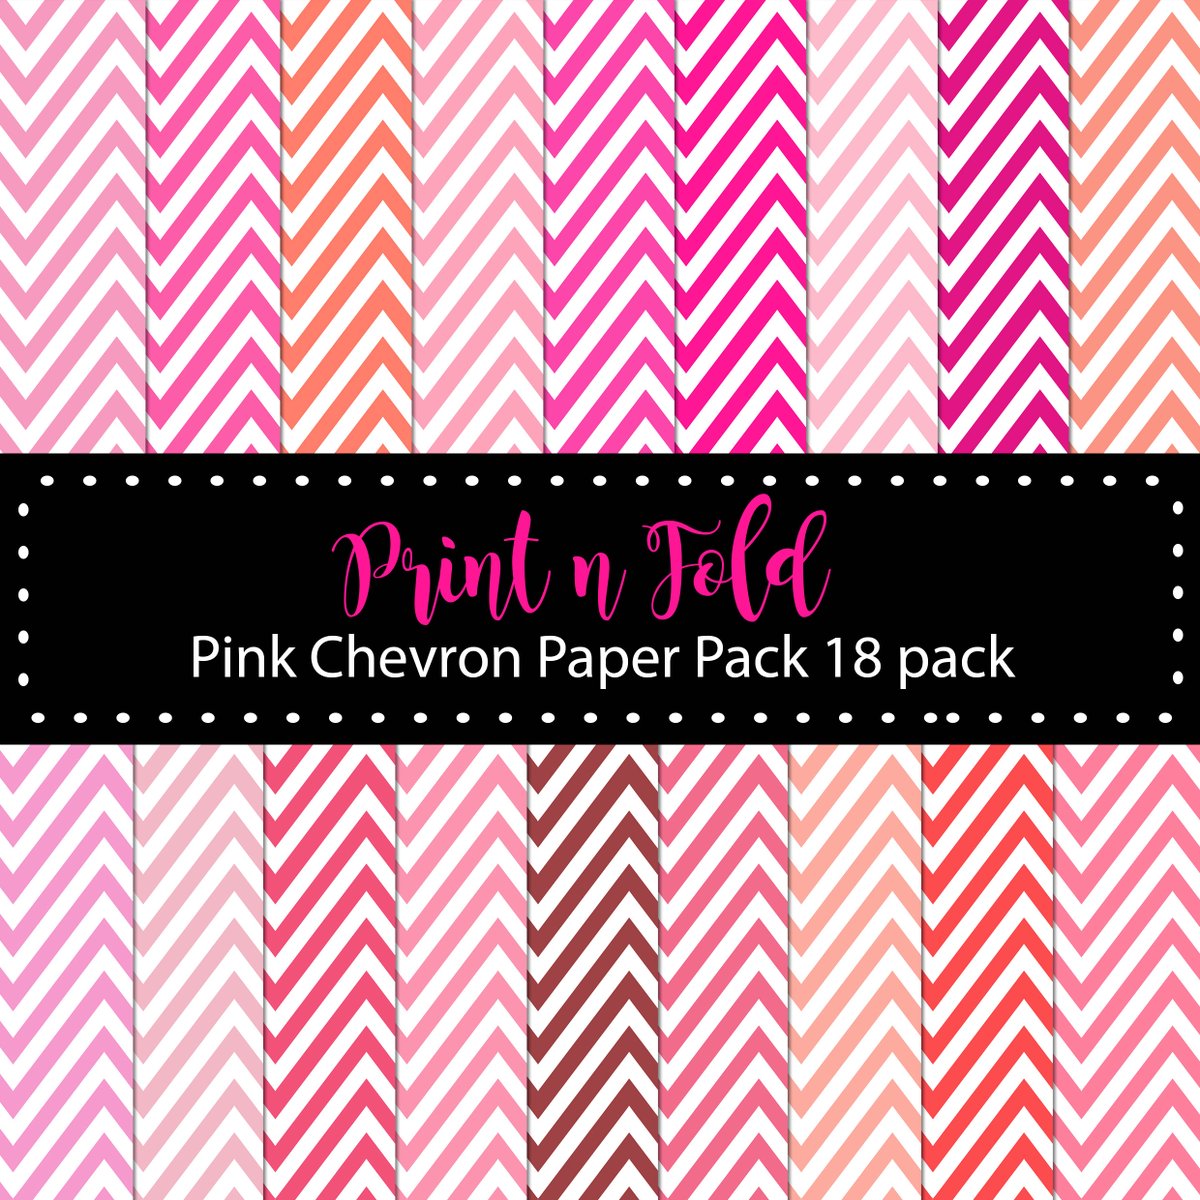 All about that pink etsy.me/3PzBS6c #craft #paperpack #smallbiz #chevron #printable #papercraft #backing #origami #cardmaking #scrapbooking #DIY #crafting